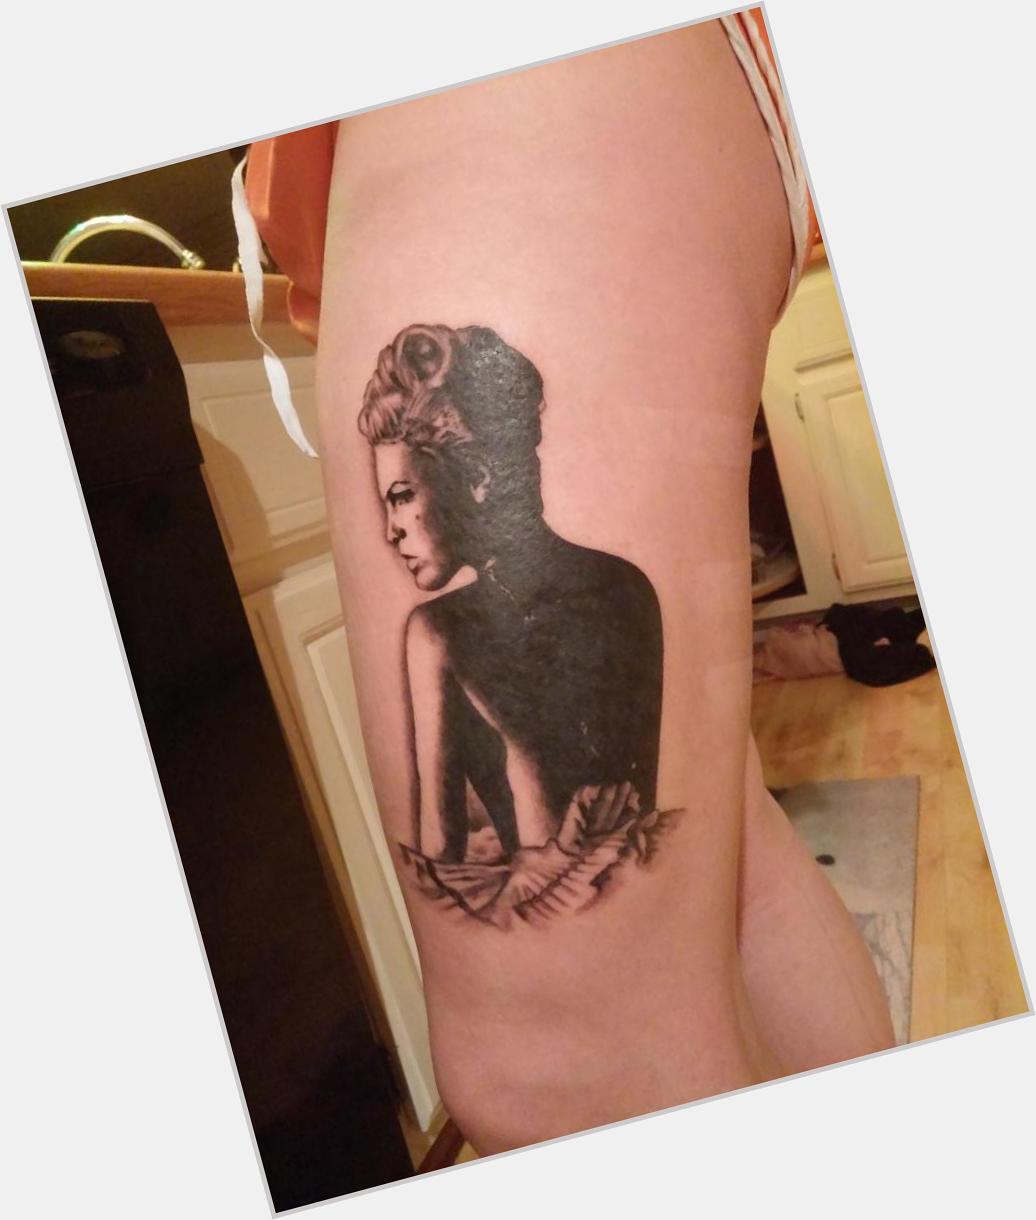  Happy Birthday P!nk, could my gf get a remessage of this badass tattoo of her favorite artist?! 